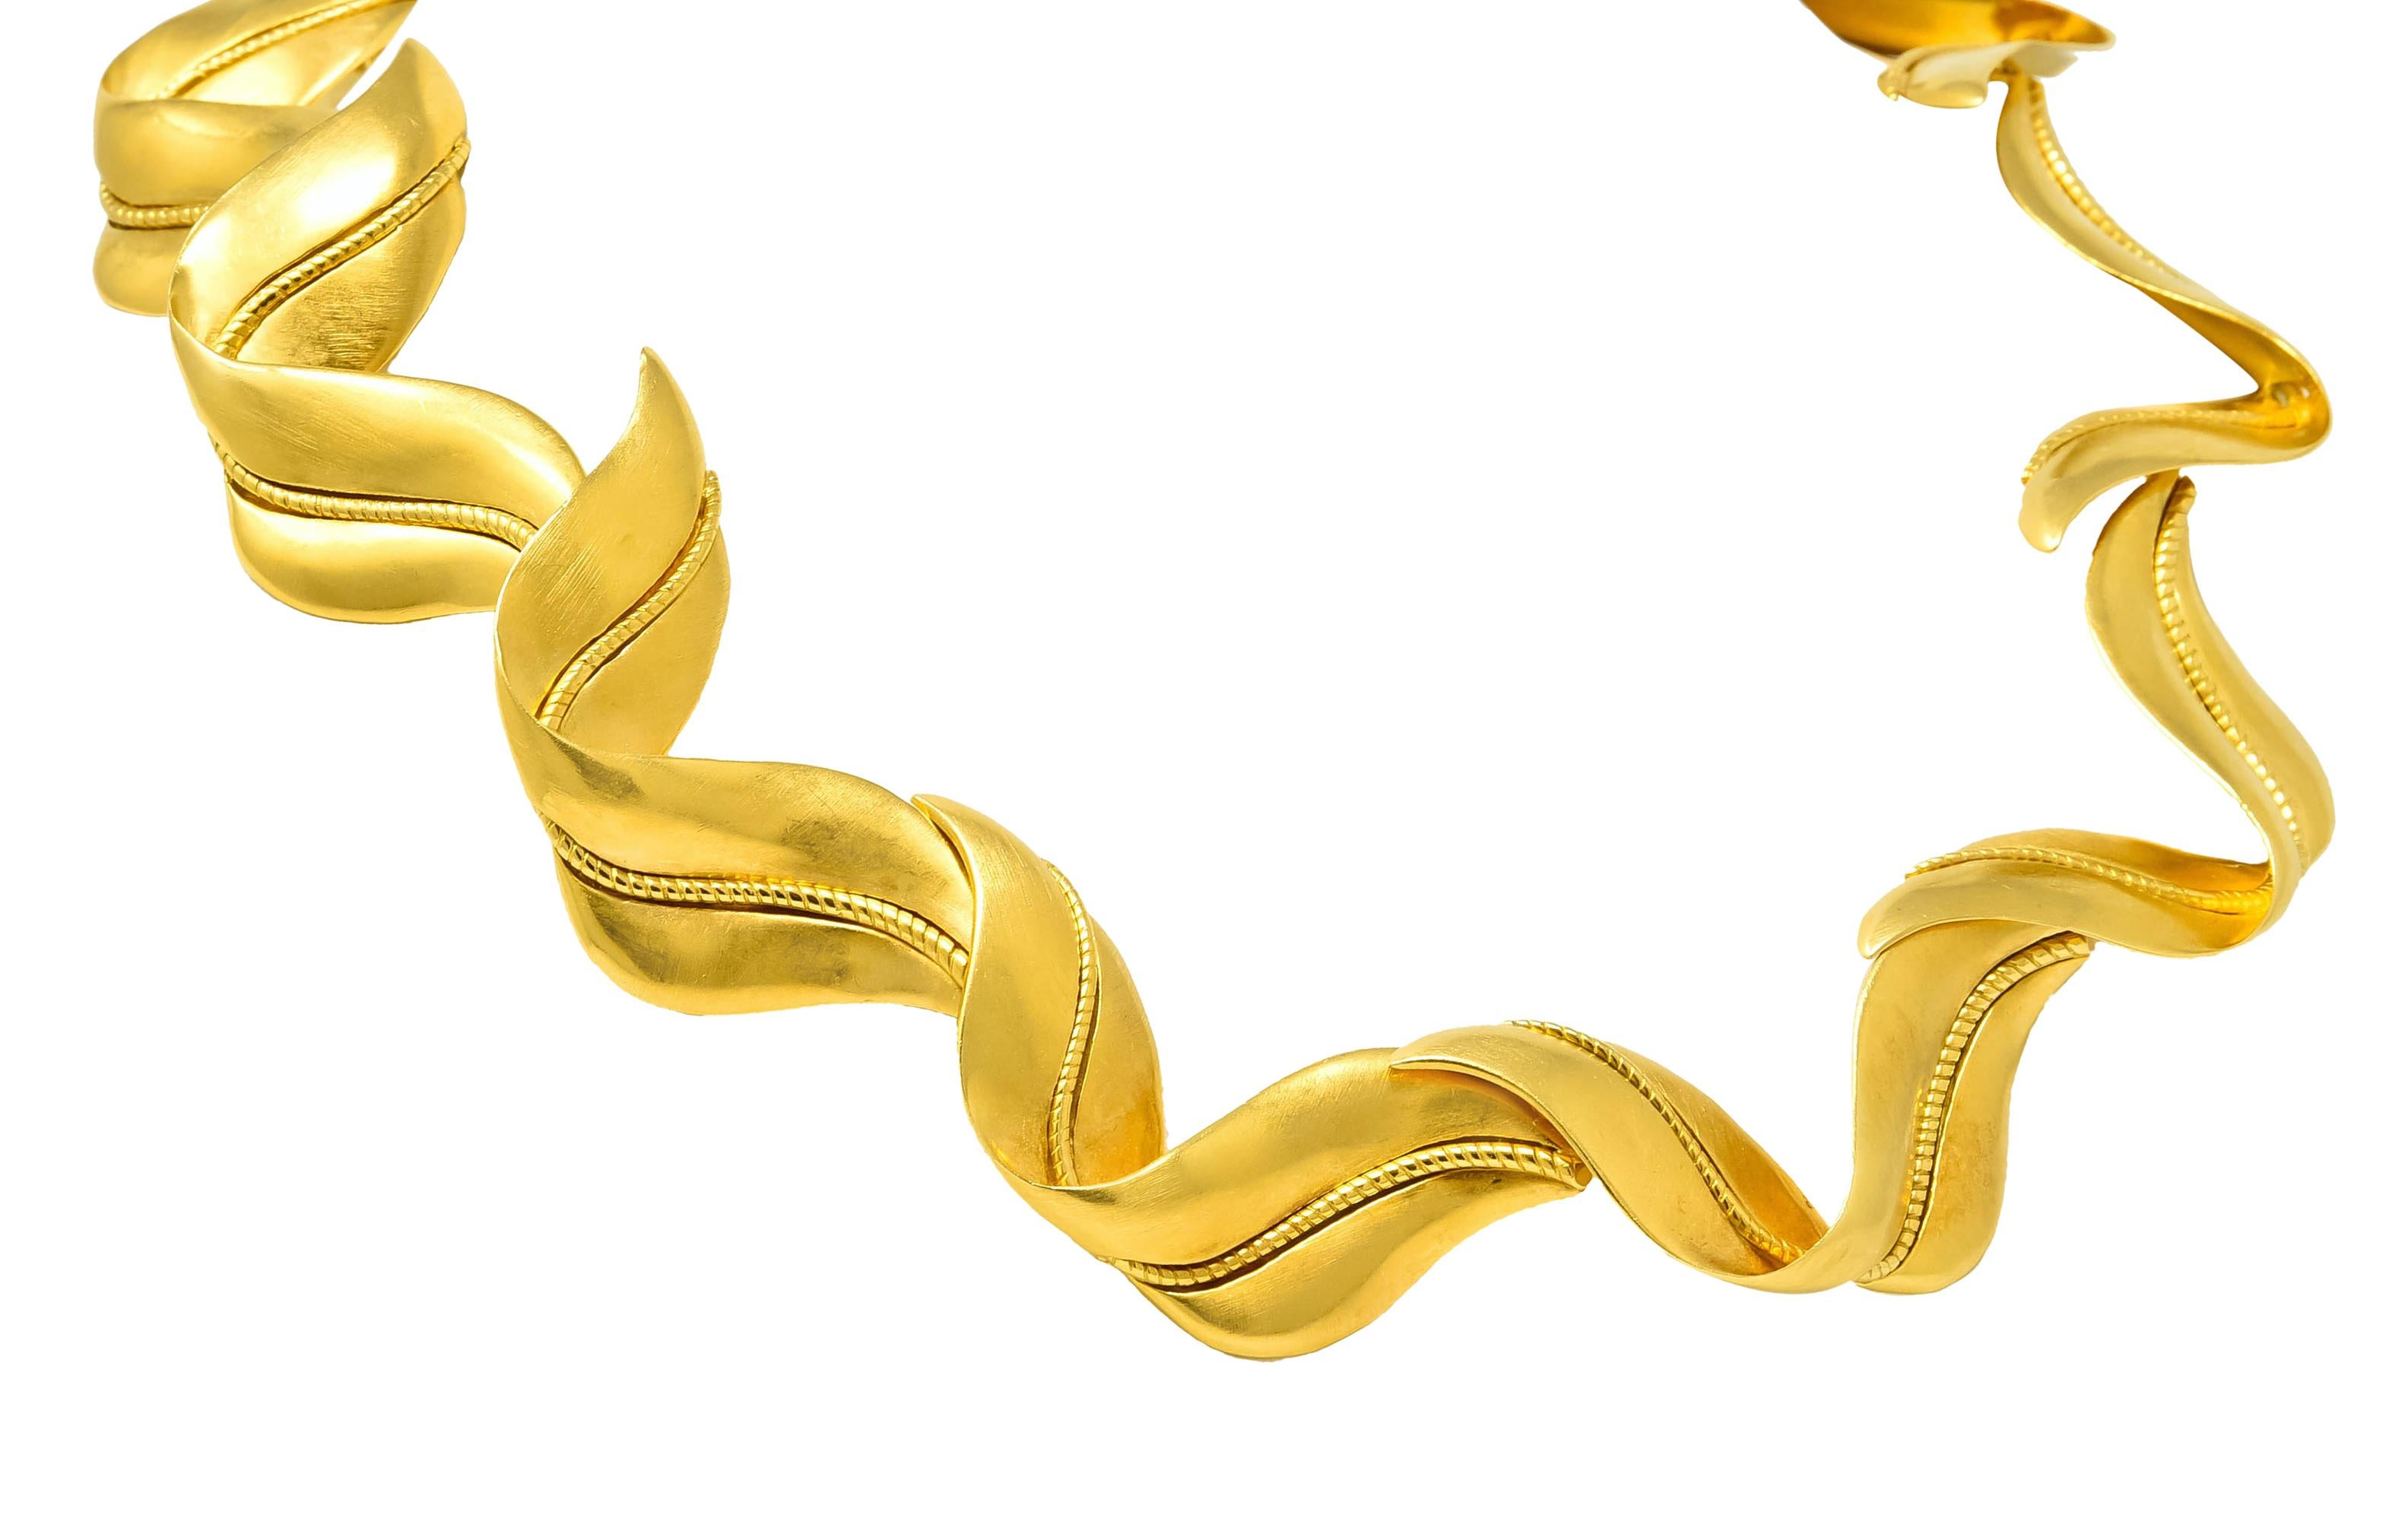 Collar style necklace comprised of matte gold, wispy, folded blades of grass links

Each centering a twisted cable motif stem

Completed by concealed hook and eye clasp

Fully signed Tiffany & Co. 1987 and attributed to Angela Cummings

Stamped 18k